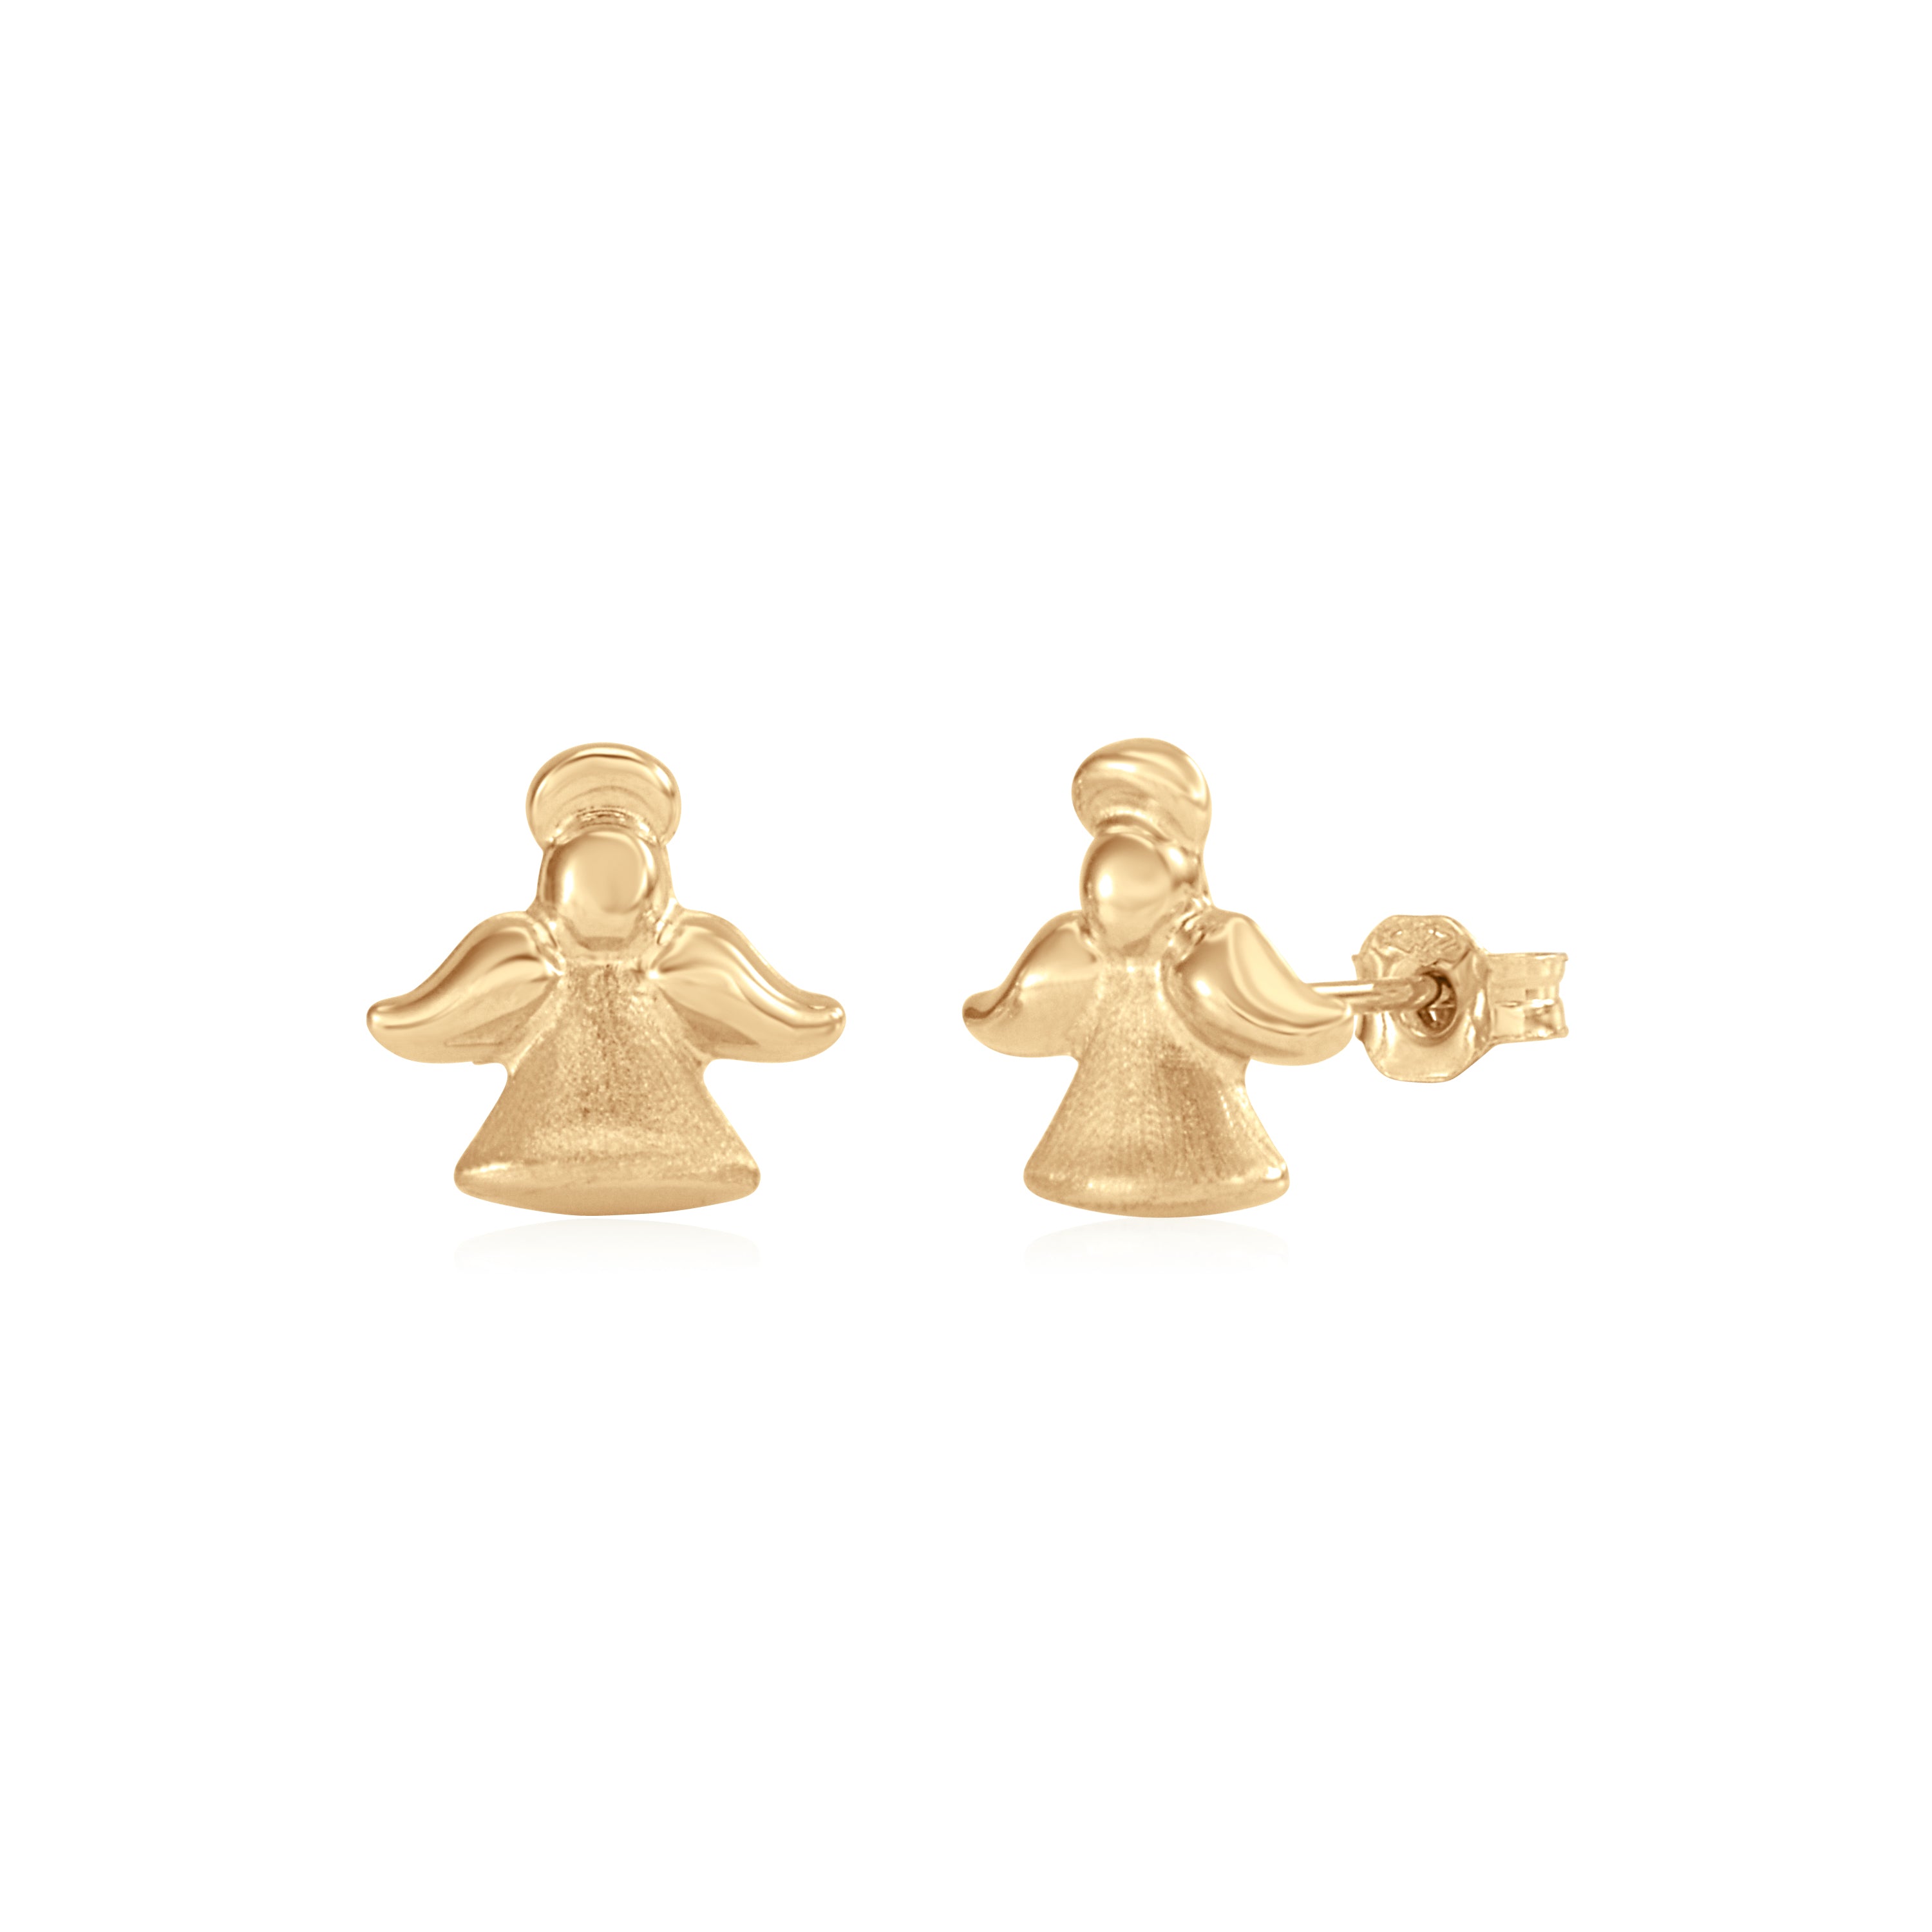 UNICORNJ Kids 14K Yellow Gold Guardian Angel Post Earrings Polished and Brushed Italy